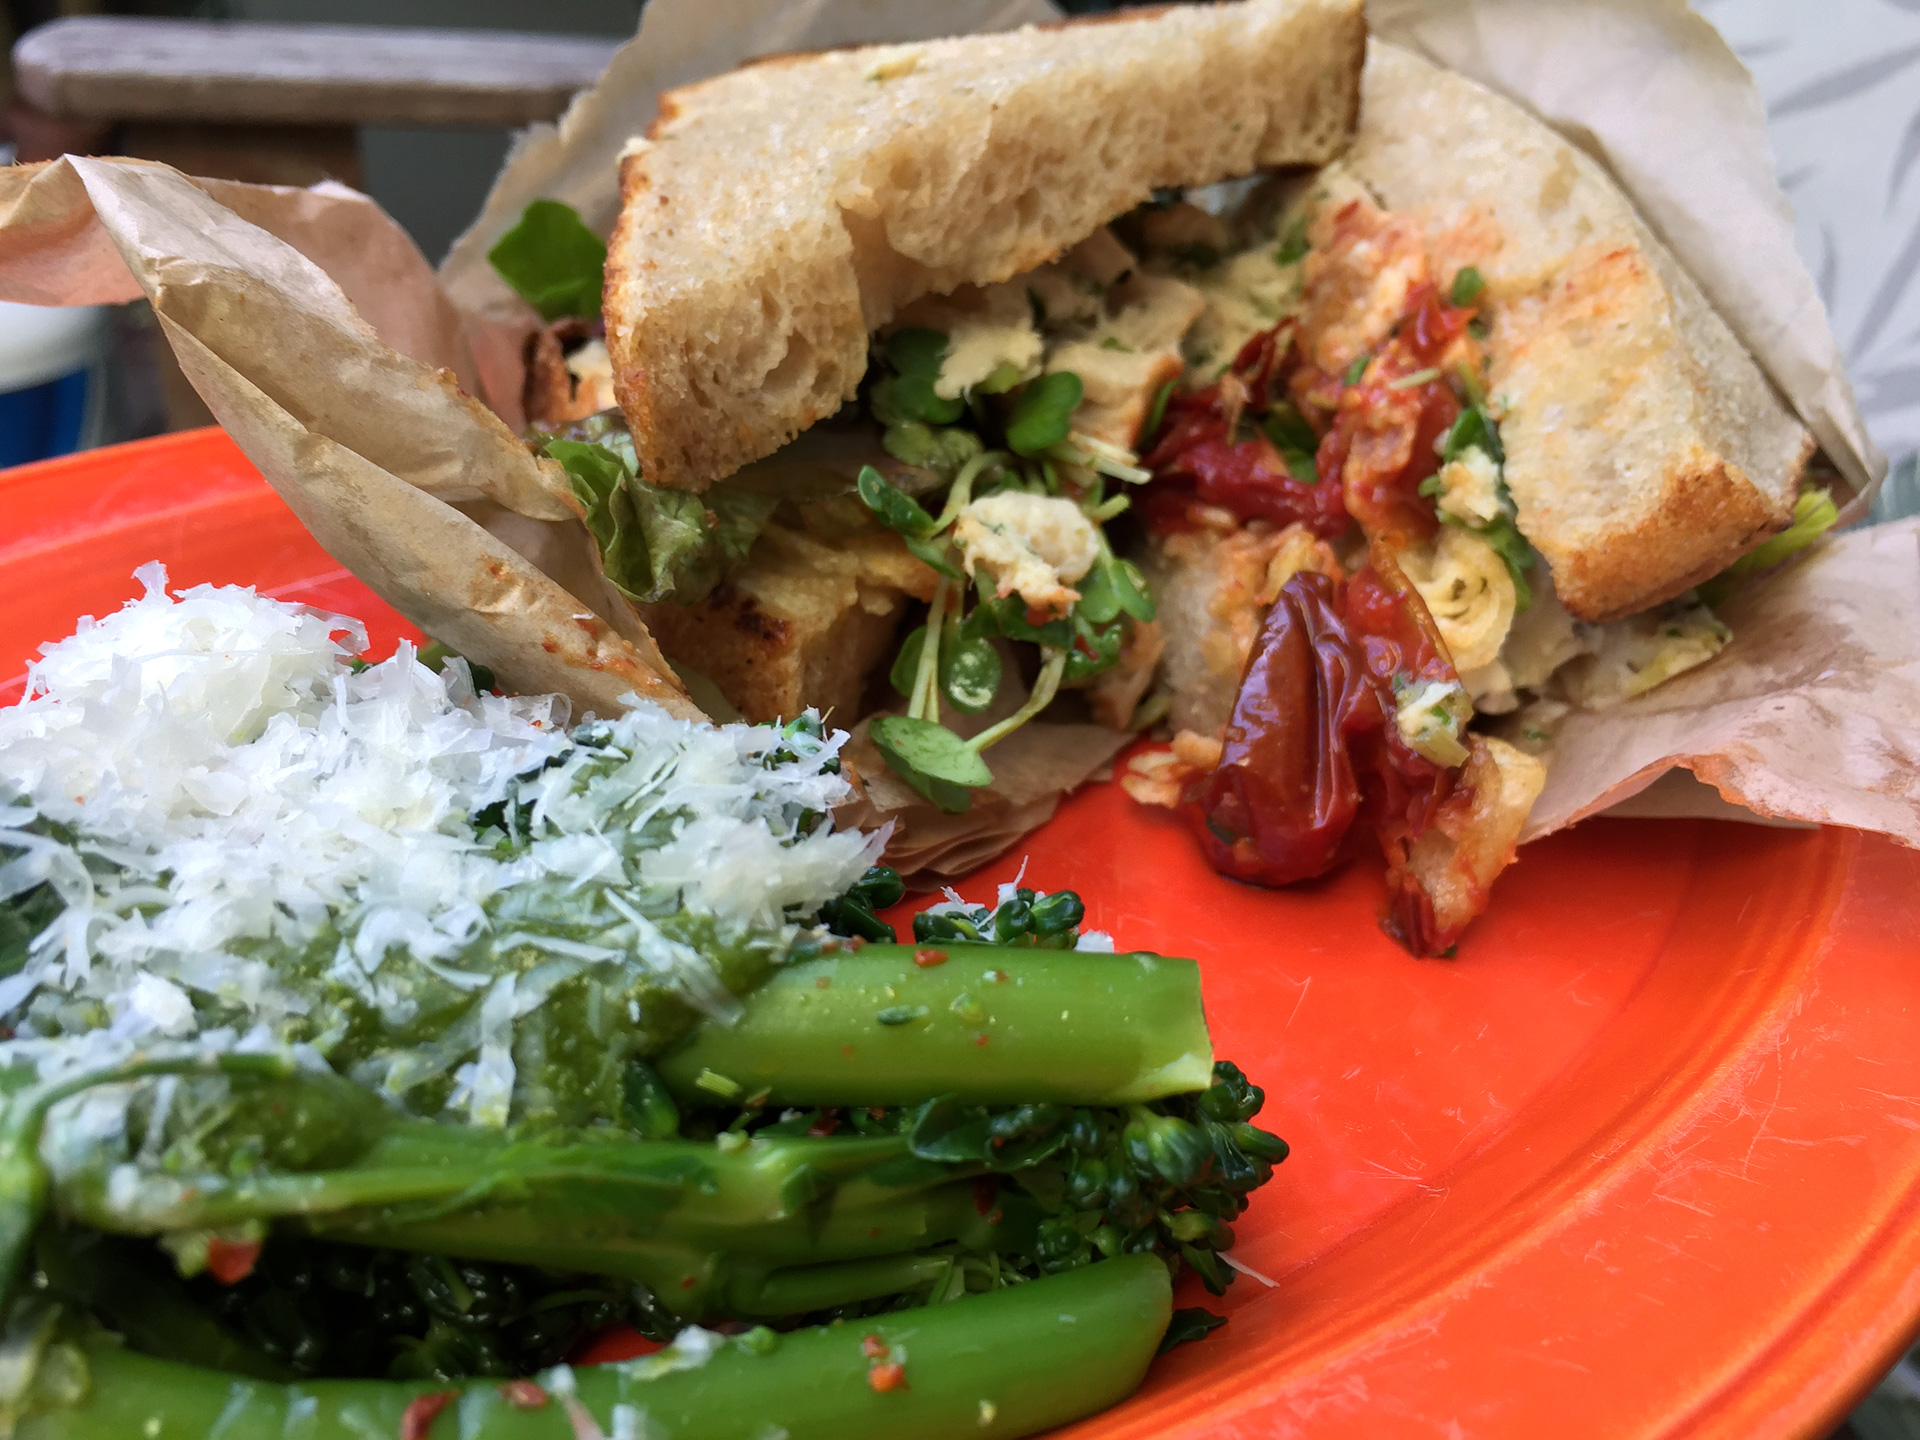 Poached local albacore sandwich on Josey Baker bread with a side of broccoli rabe with chermoula dressing